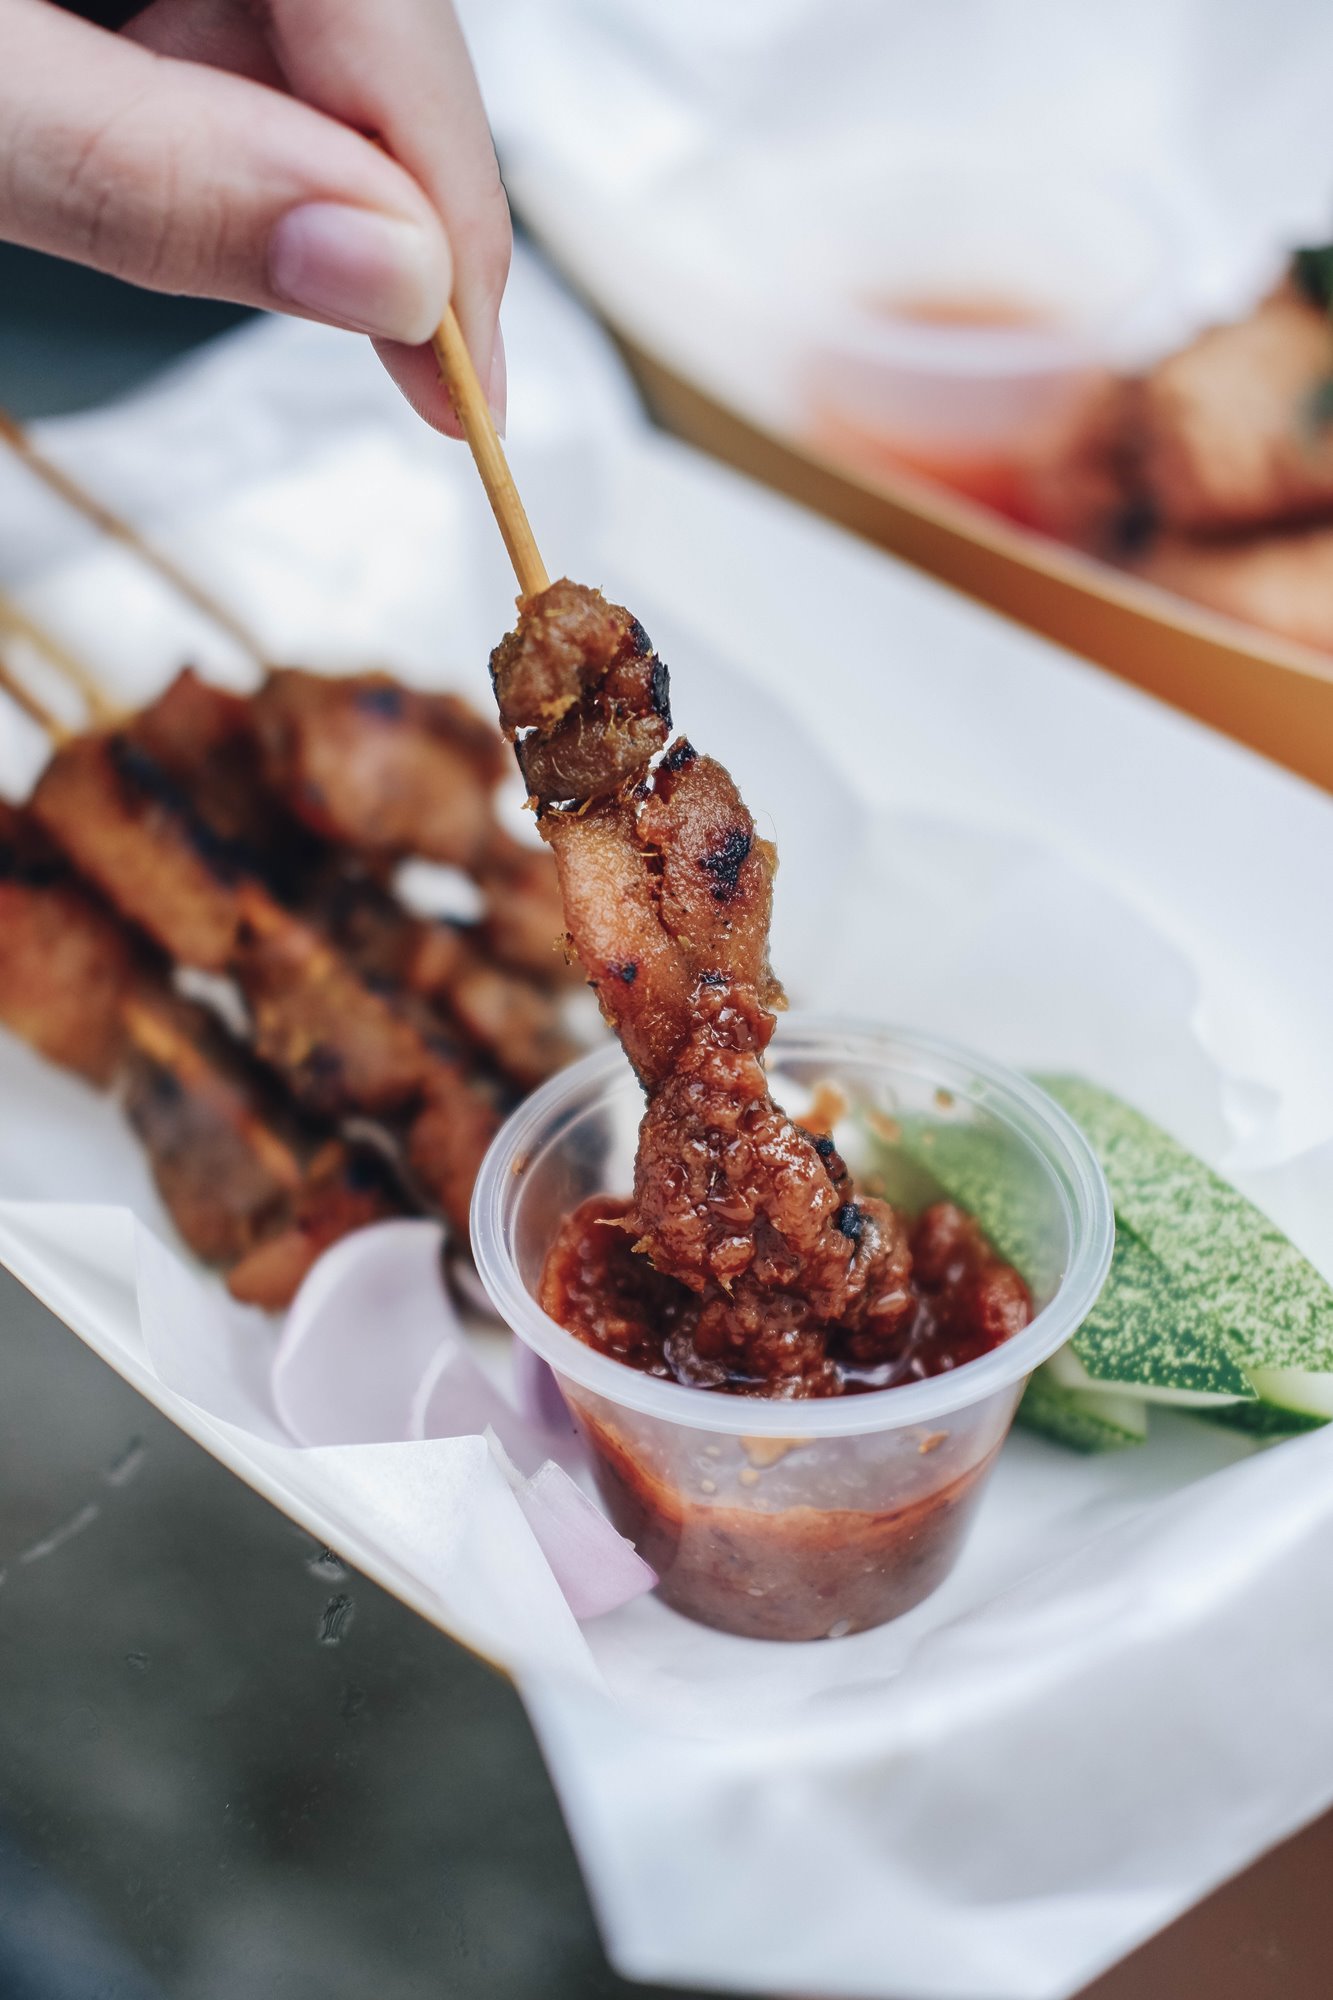 Chick On Stick - Bugis Café - Outdoor Beers and Delights @ Studio M Hotel Singapore